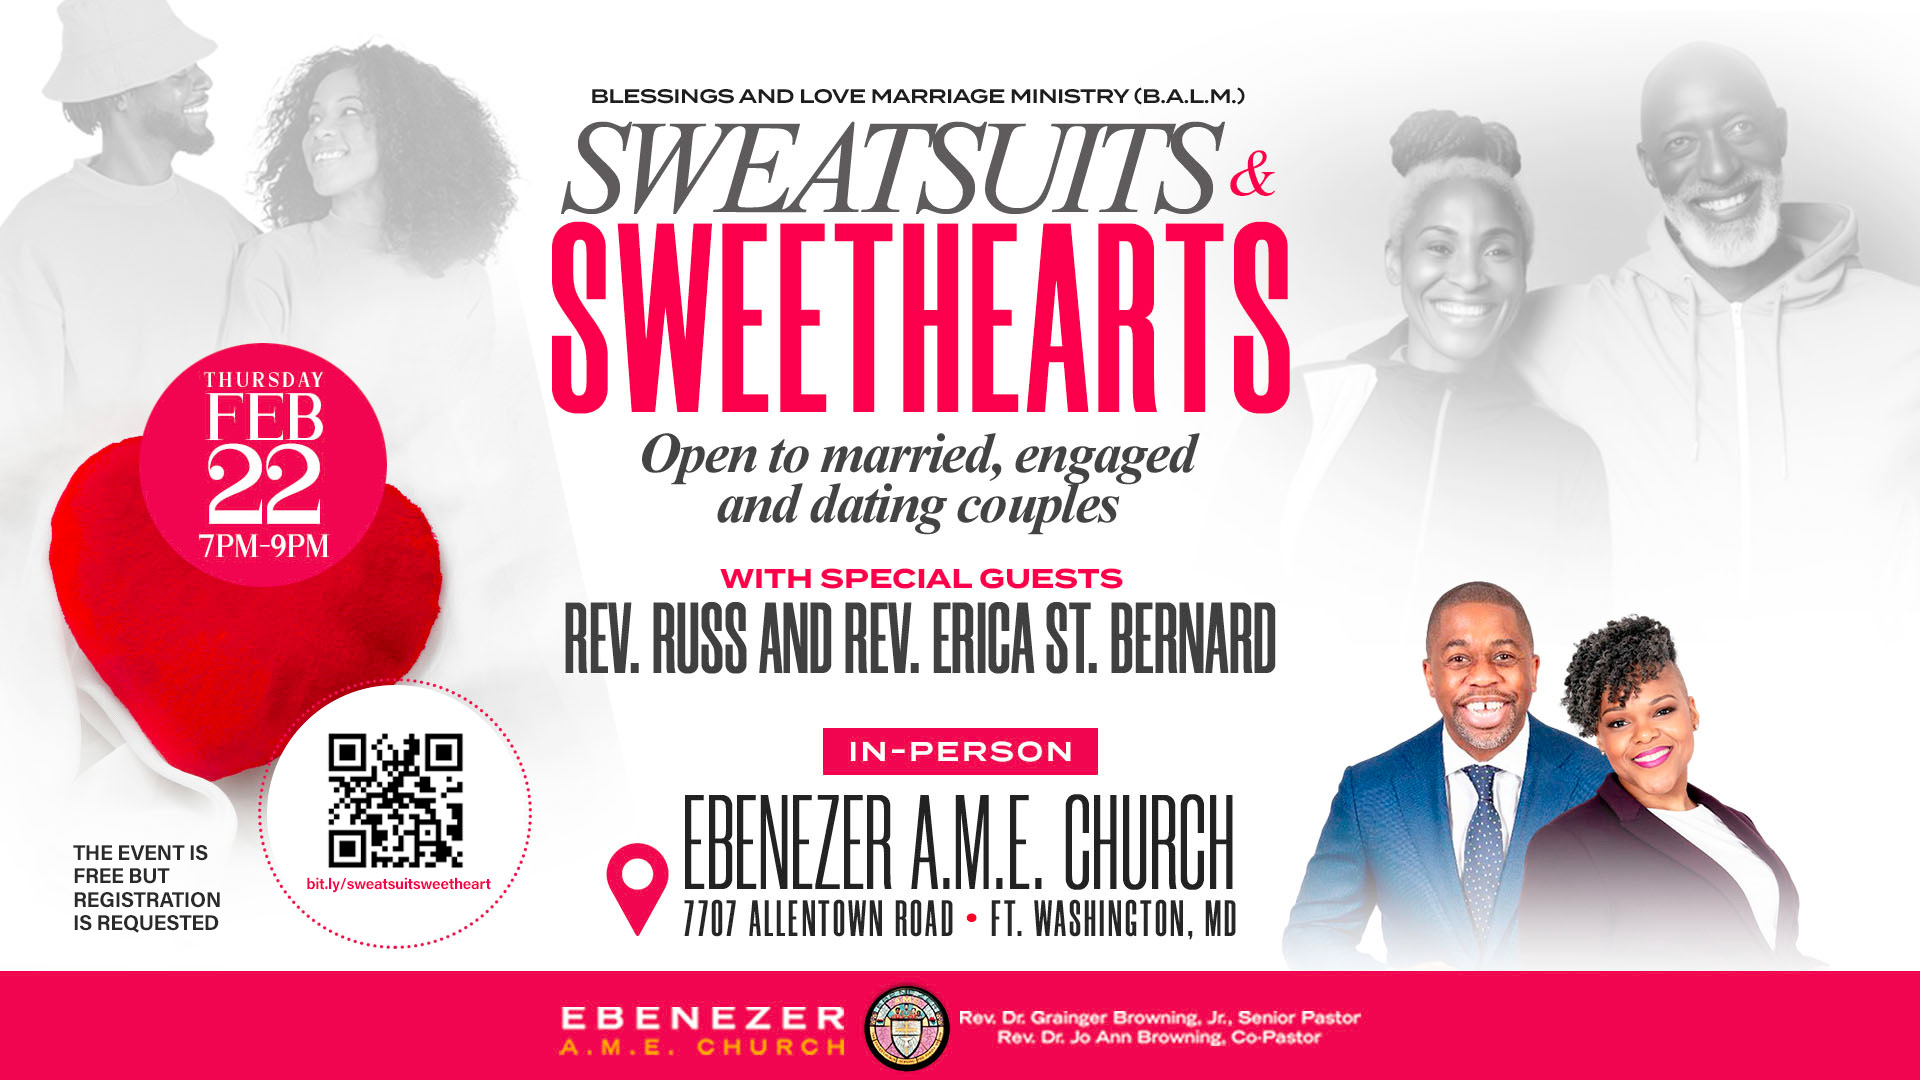 Sweatsuits and Sweethearts with QR code 